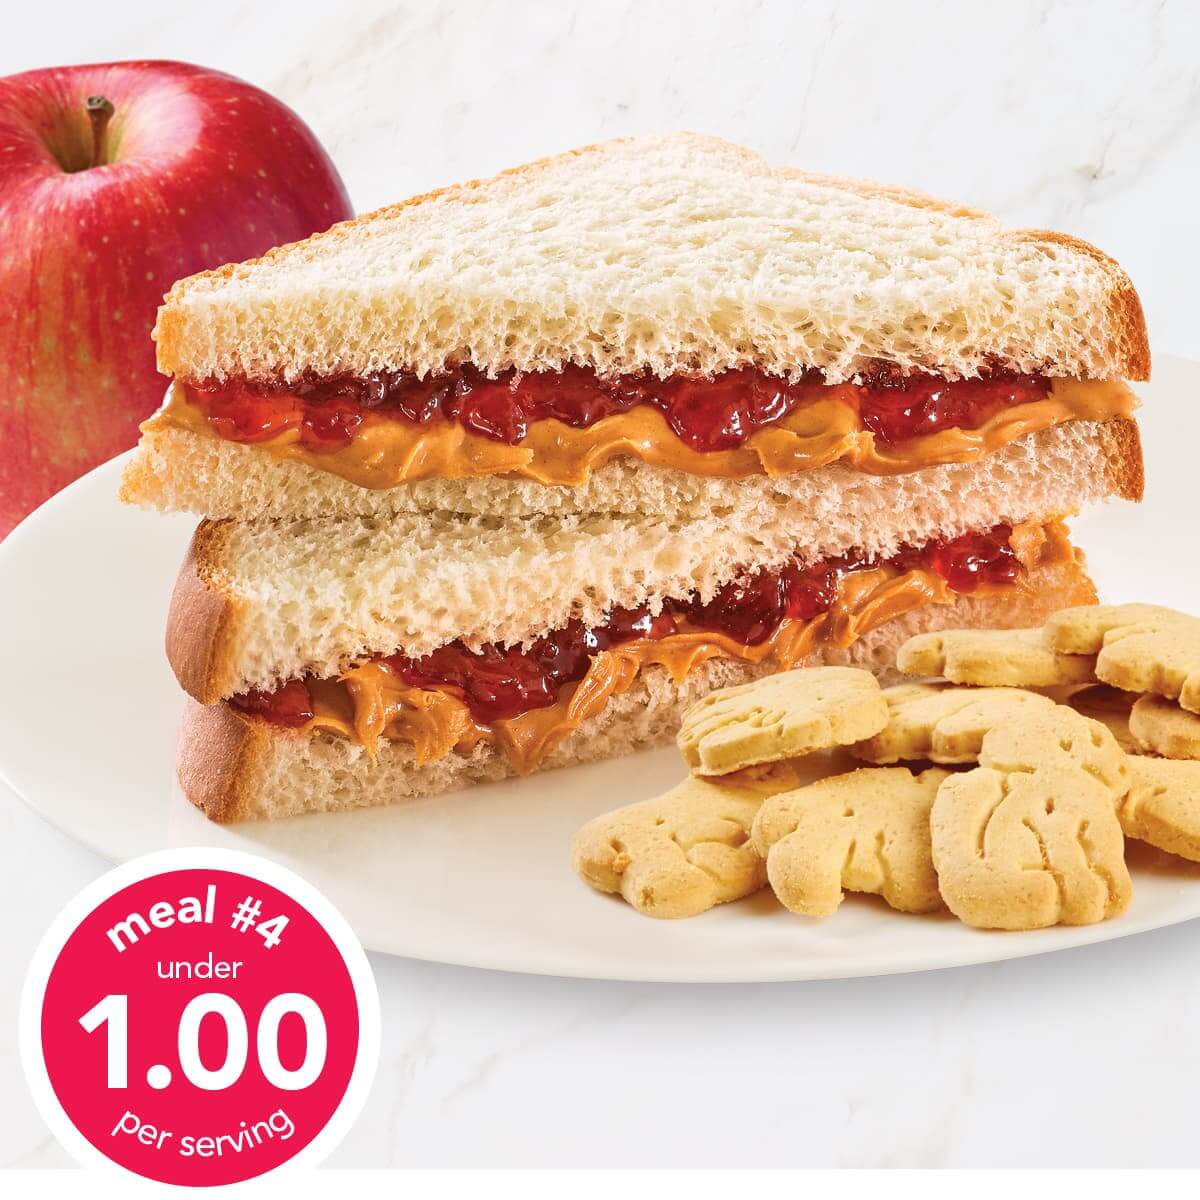 PBJ Sandwich with Animal Crackers and Apple